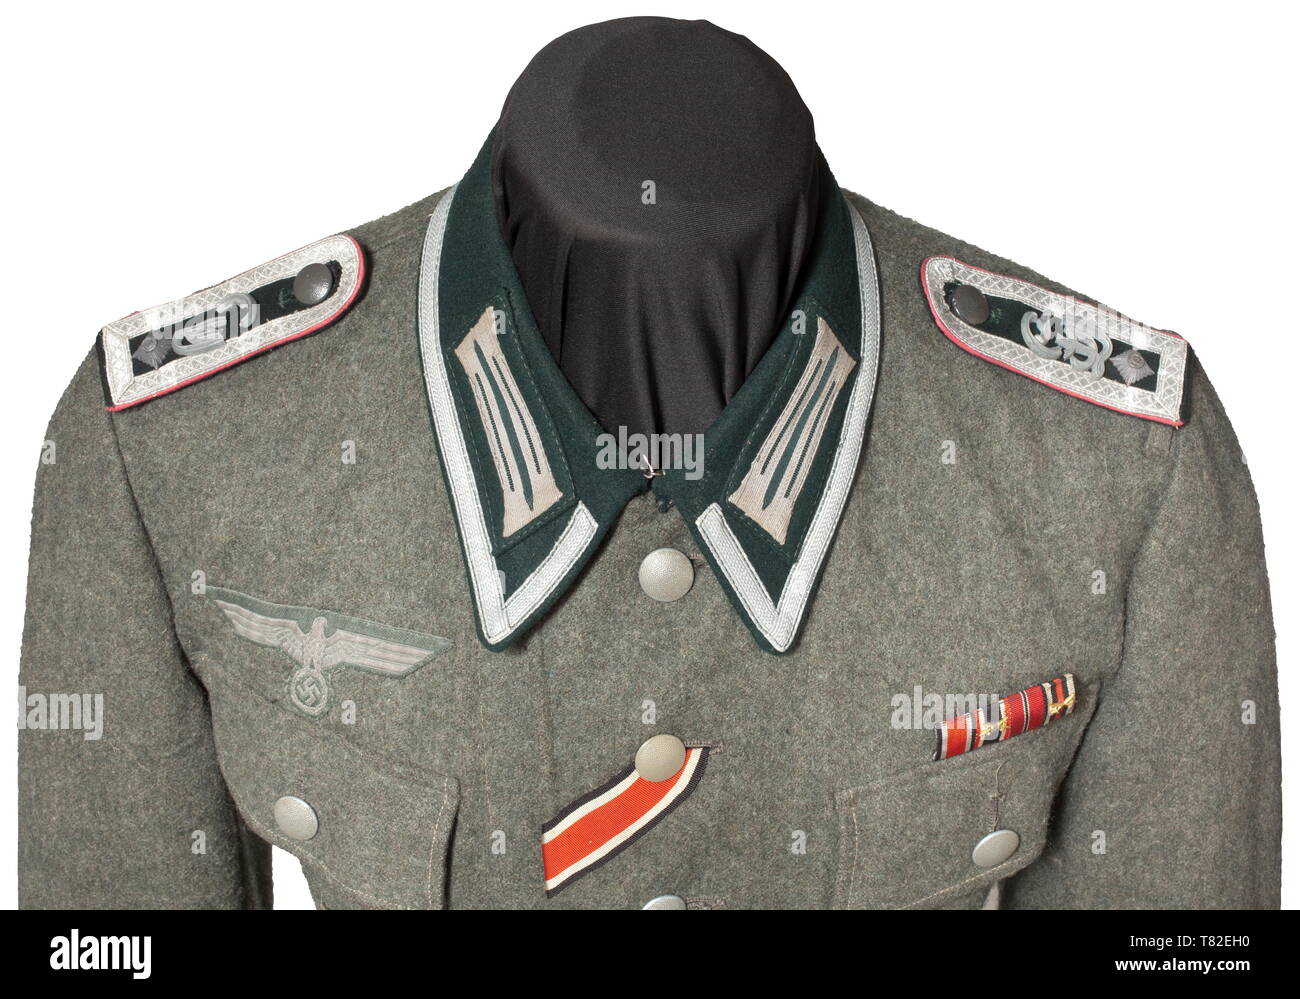 A field tunic M 43 for a Feldwebel in Panzer Regiment 'Großdeutschland' Made of field-grey woollen cloth, dark green turn-down collar with stitched-on collar patches and NCO lace, machine-embroidered national eagle, the petrol blue silk inner liner with size- and depot stampings '161 - 165,39 100 59' and 'T43'. Looped shoulder boards with pink piping, applied rank stars and 'GD' cipher in fine zinc (broken). Affixed to the uniform is the original sewn-on sleeveband 'Großdeutschland', an Iron Cross 1st Class of 1939 (early issue), a field orders c, Additional-Rights-Clearance-Info-Not-Available Stock Photo